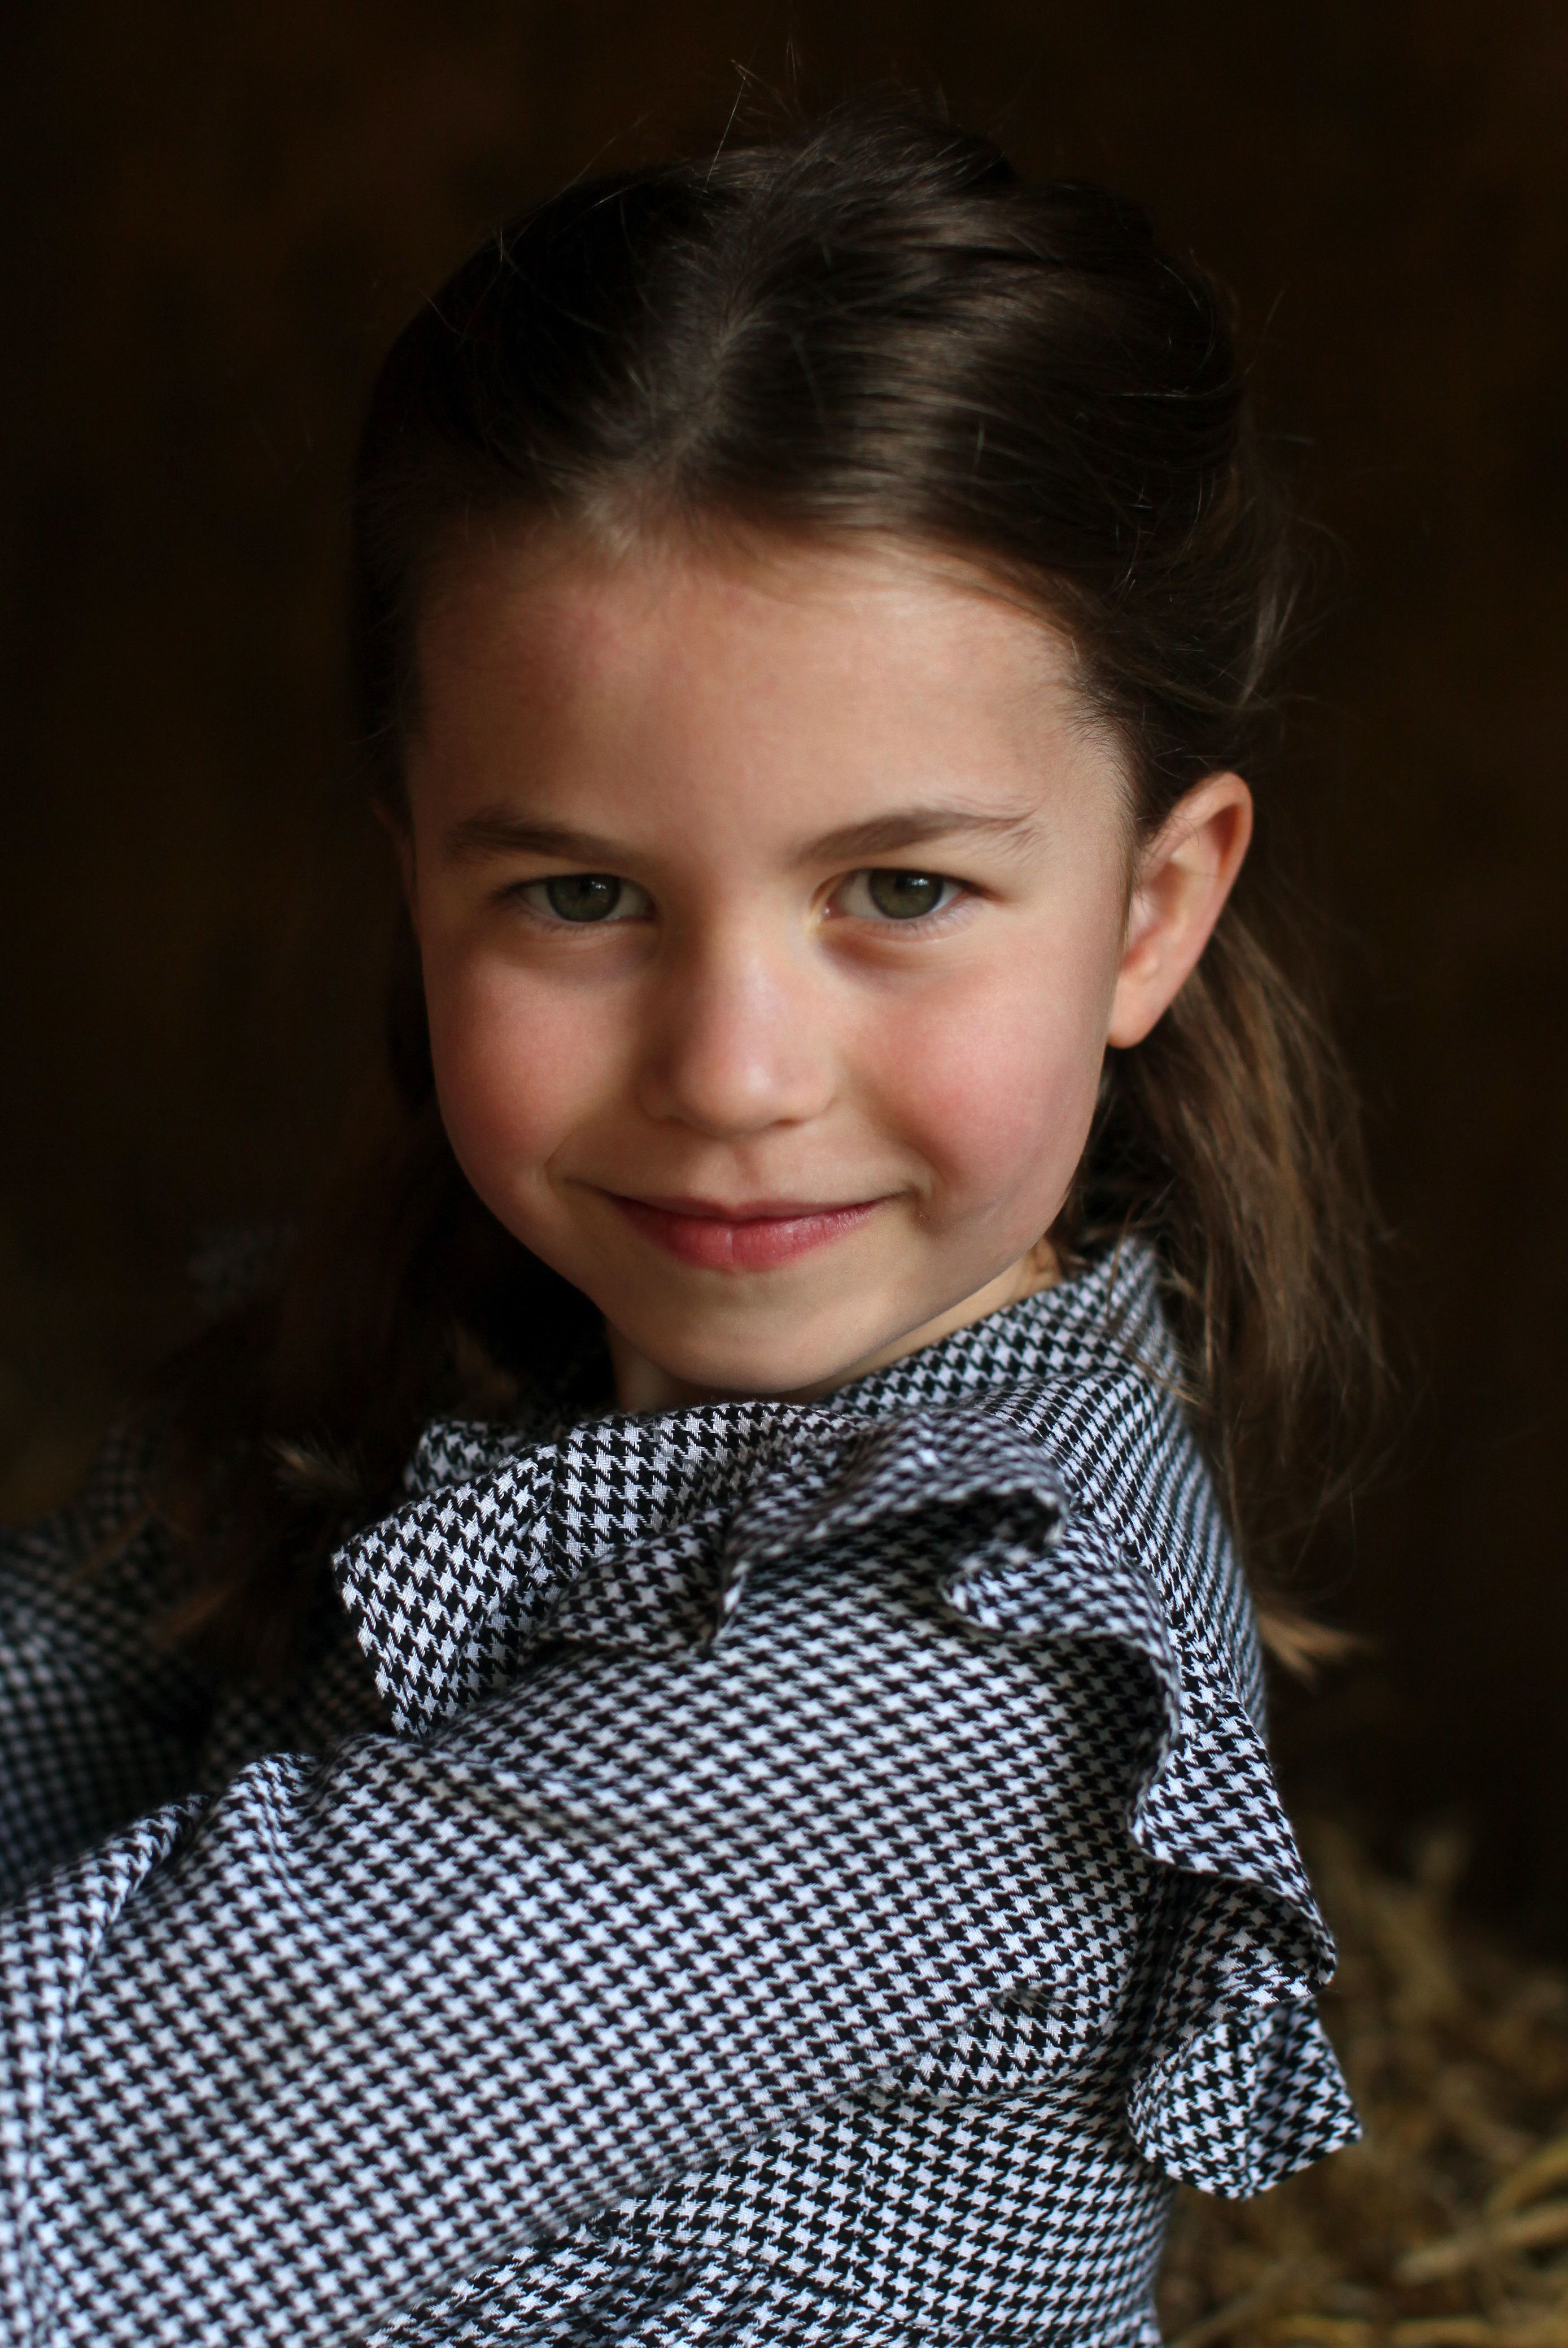 <p>This portrait of Princess Charlotte was shared by <a href="https://www.wonderwall.com/celebrity/profiles/overview/prince-william-482.article">Prince William</a> and <a href="https://www.wonderwall.com/celebrity/profiles/overview/duchess-kate-1356.article">Duchess Kate</a> to mark the young royal's 5th birthday on May 2, 2020. Making it even sweeter? The photograph was taken by Kate on the queen's Sandringham Estate. </p>